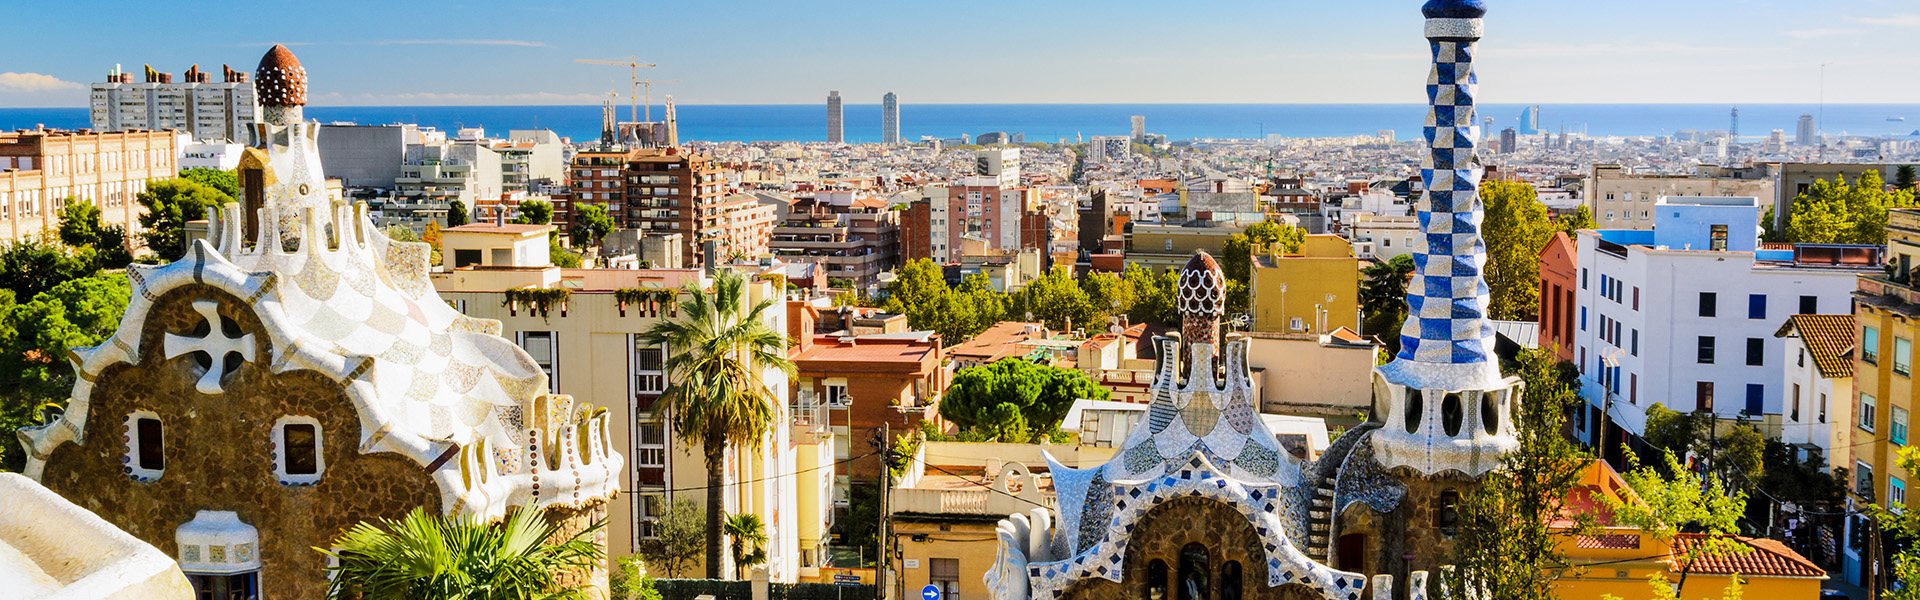 Ideas for All Saints' Long Weekend 2016: visiting Gaudi's Barcelona